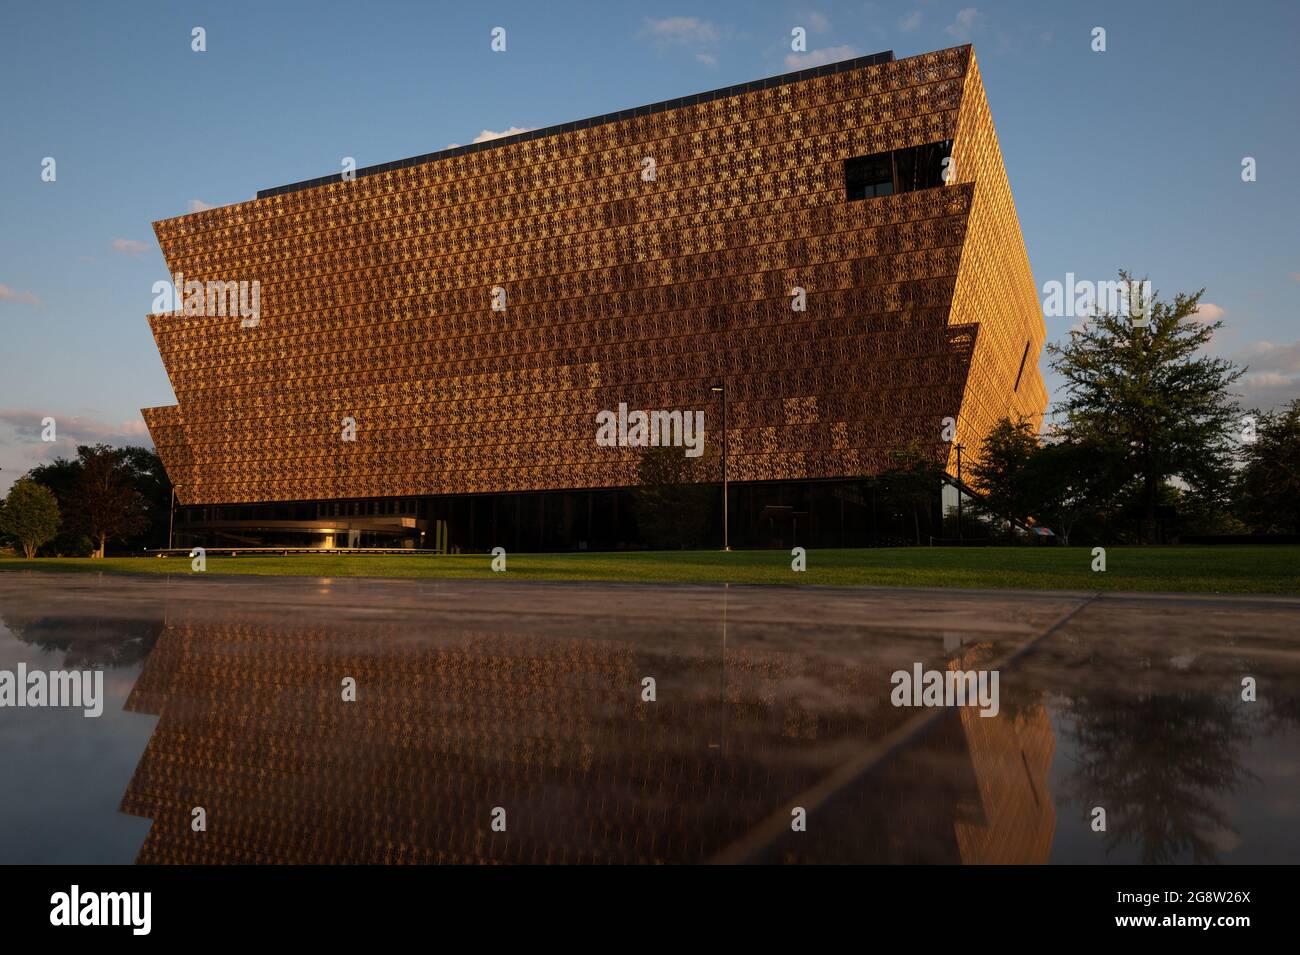 Washington, USA. 23rd July, 2021. A general view of the Smithsonian National Museum of African American History and Culture in Washington, DC, on Thursday, July 22, 2021, amid the coronavirus pandemic. As the Delta variant of COVID-19 spreads rapidly in the America and around the world, this week in Washington negotiations over infrastructure legislation have continued in Congress. (Graeme Sloan/Sipa USA) Credit: Sipa USA/Alamy Live News Stock Photo